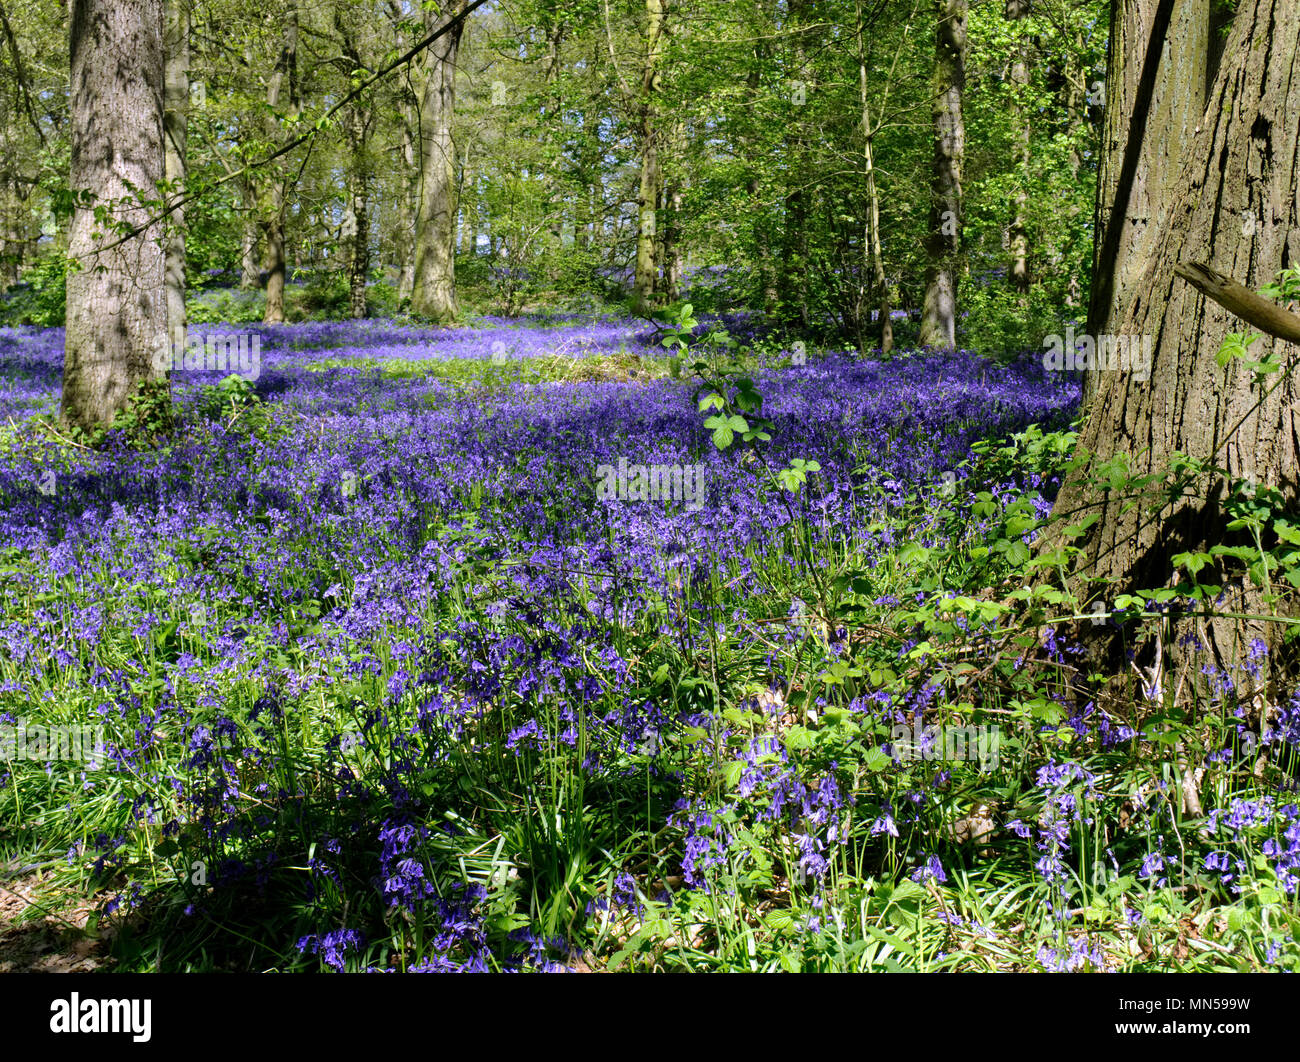 A beautiful display of English Bluebells (Hyacinthoides non-scripta) in Great Wood, near Blickling in Norfolk, England,in May 2018. Stock Photo